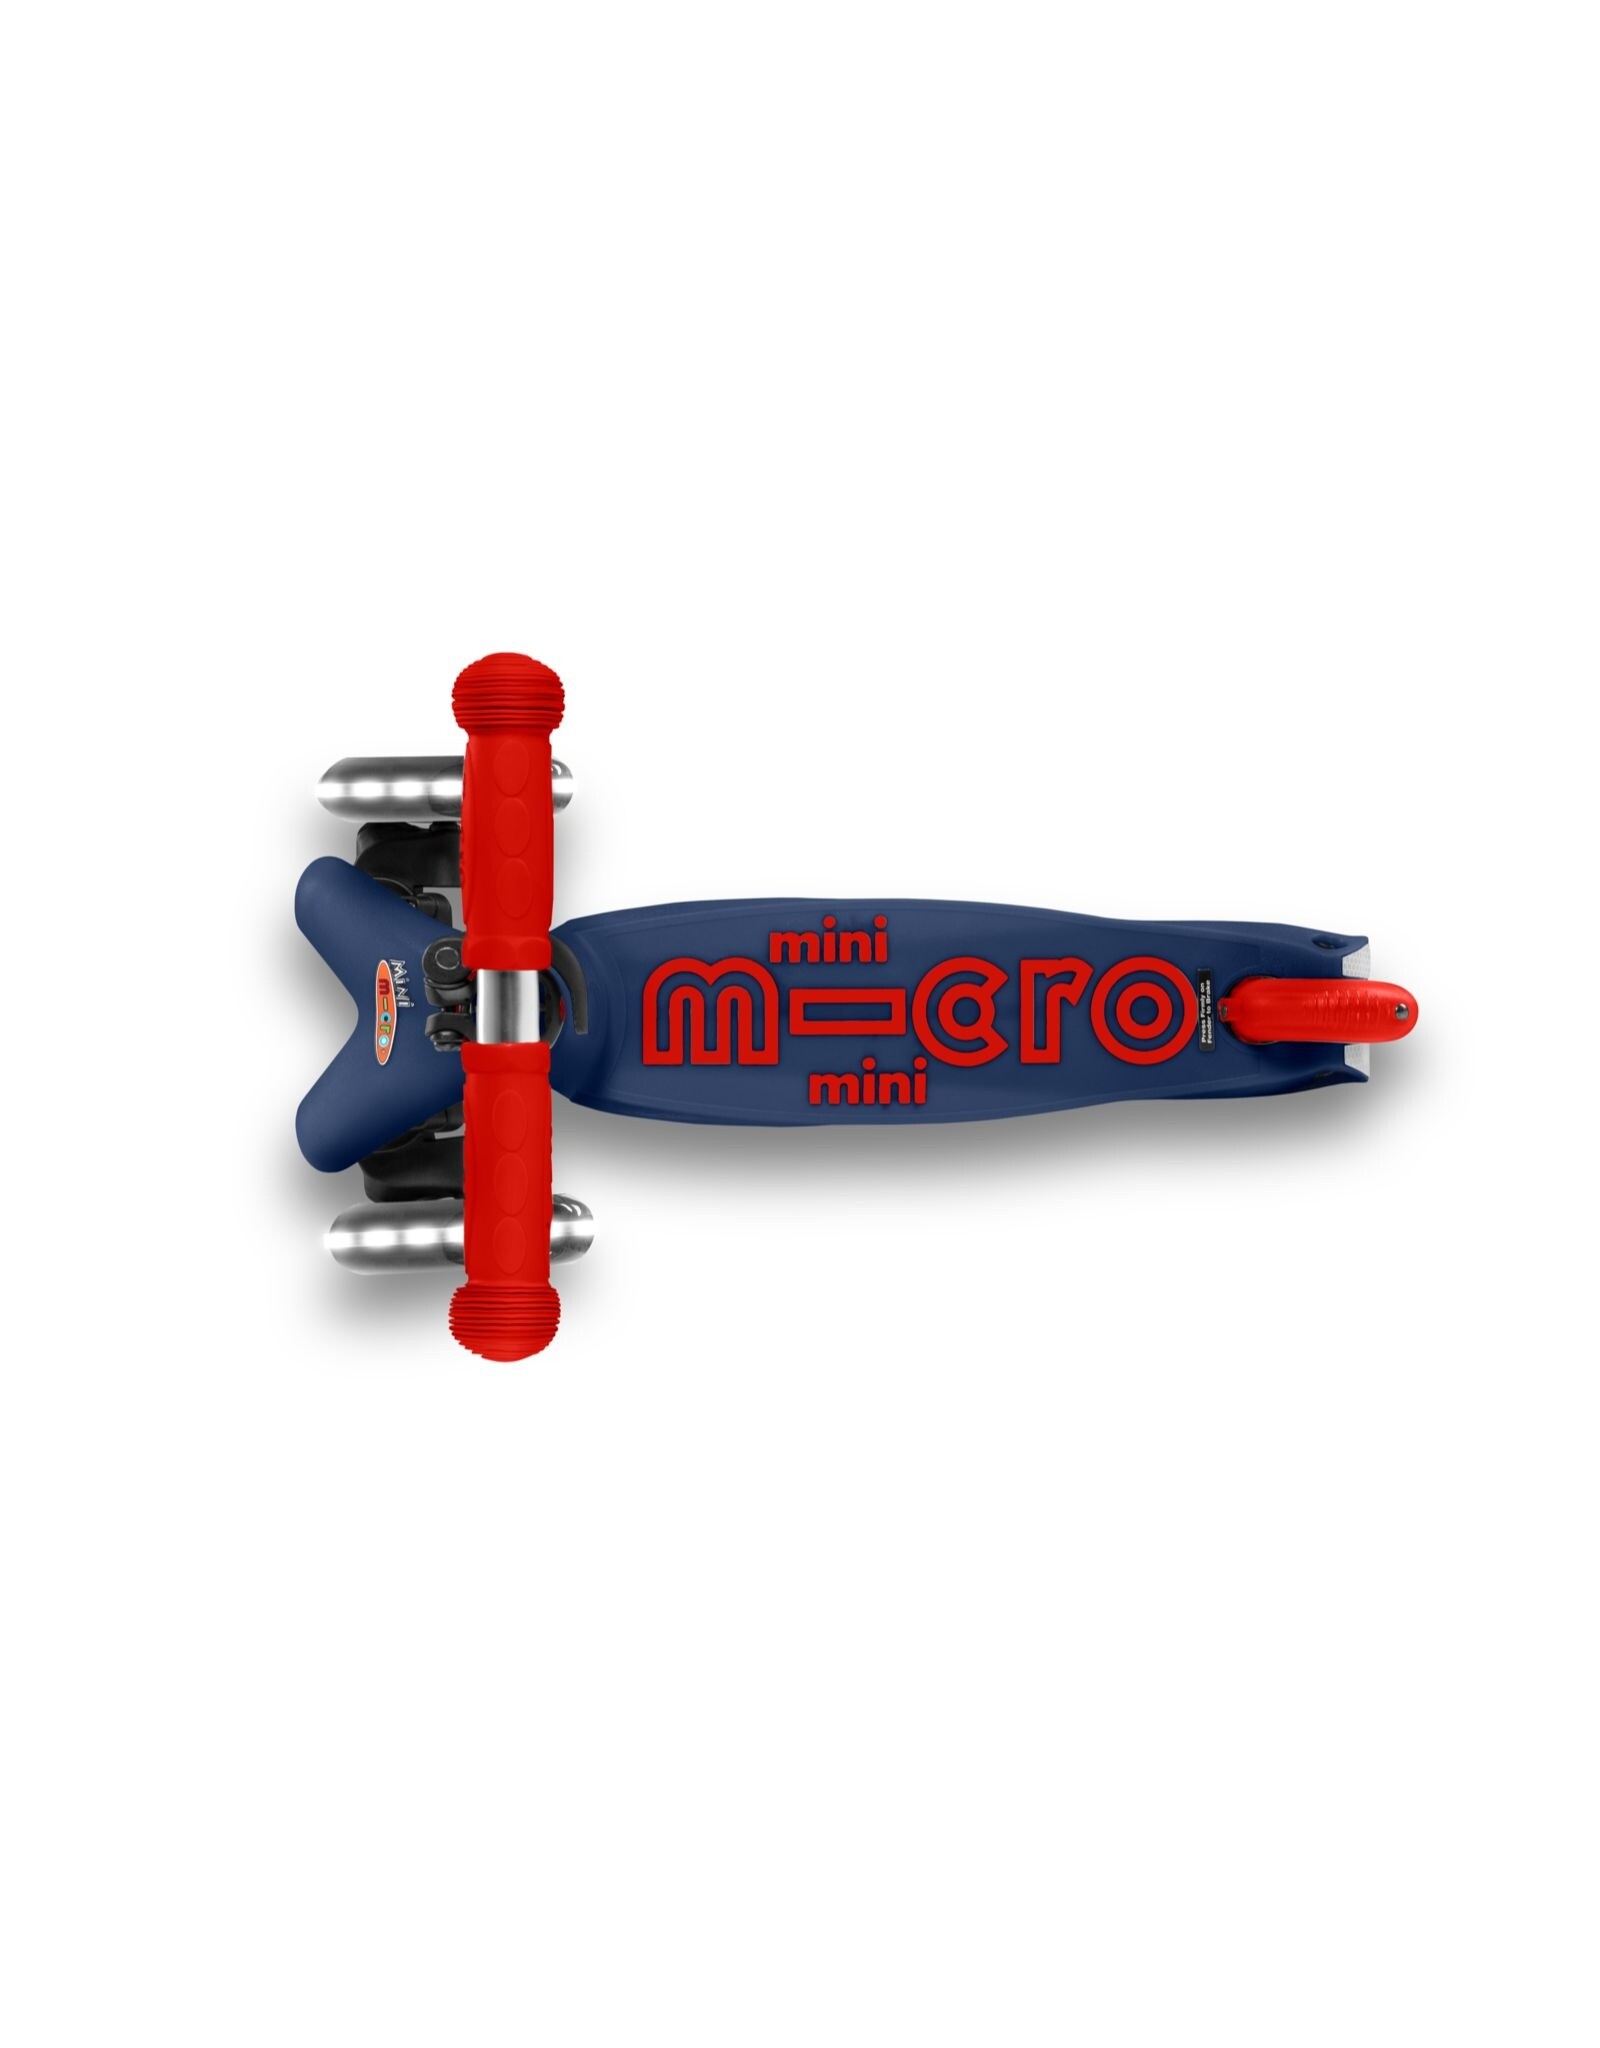 Micro Micro Mini Deluxe LED Scooter - Navy Blue